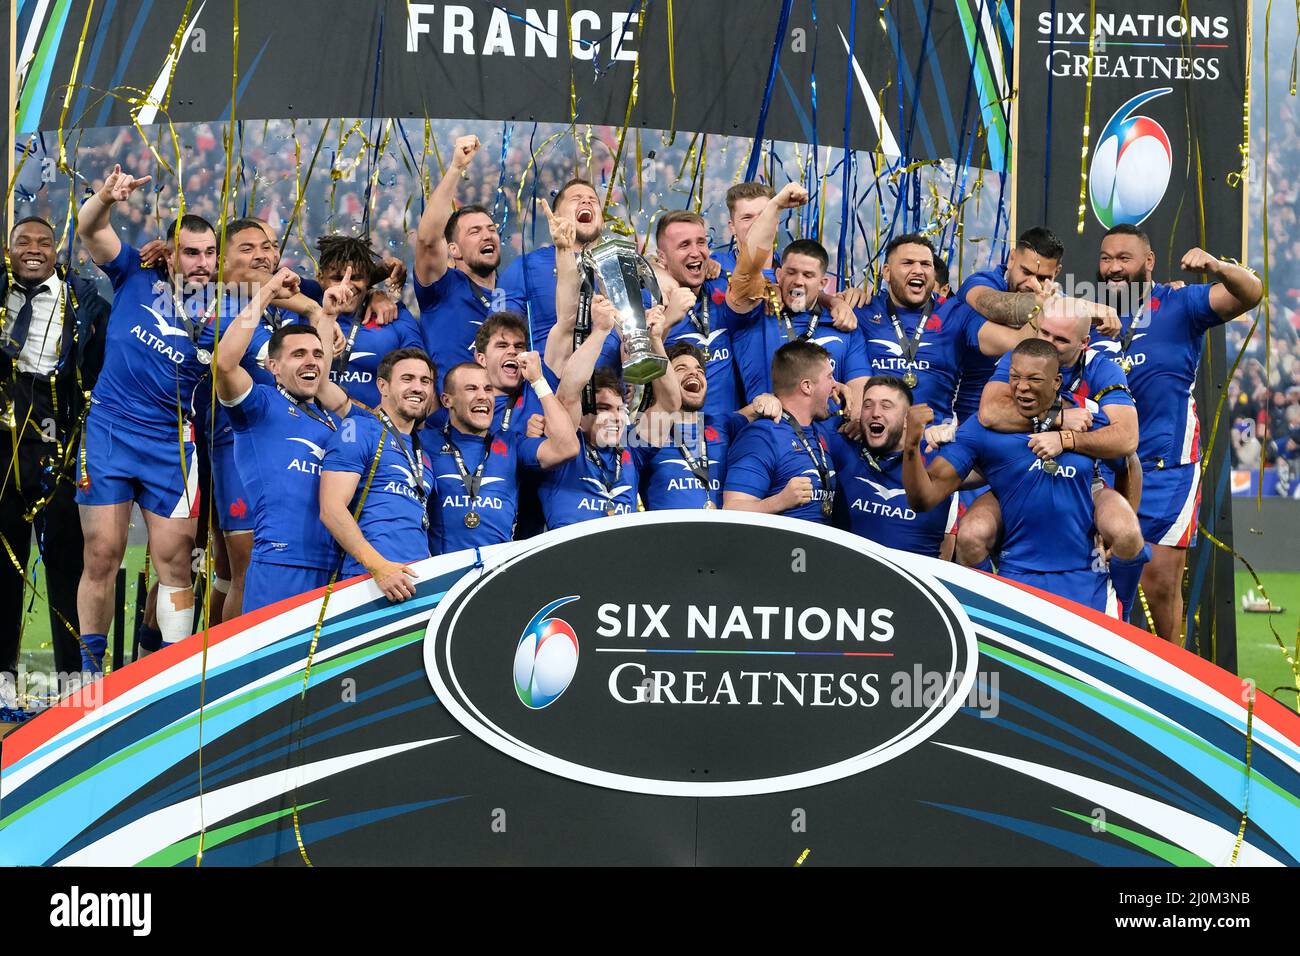 March 20, 2022, Saint Denis, Seine Saint Denis, France: The French team won the Guinness Six Nations Rugby tournament and the grand slam at the Stade de France - St Denis - France.France won 25:13 (Credit Image: © Pierre Stevenin/ZUMA Press Wire) Stock Photo